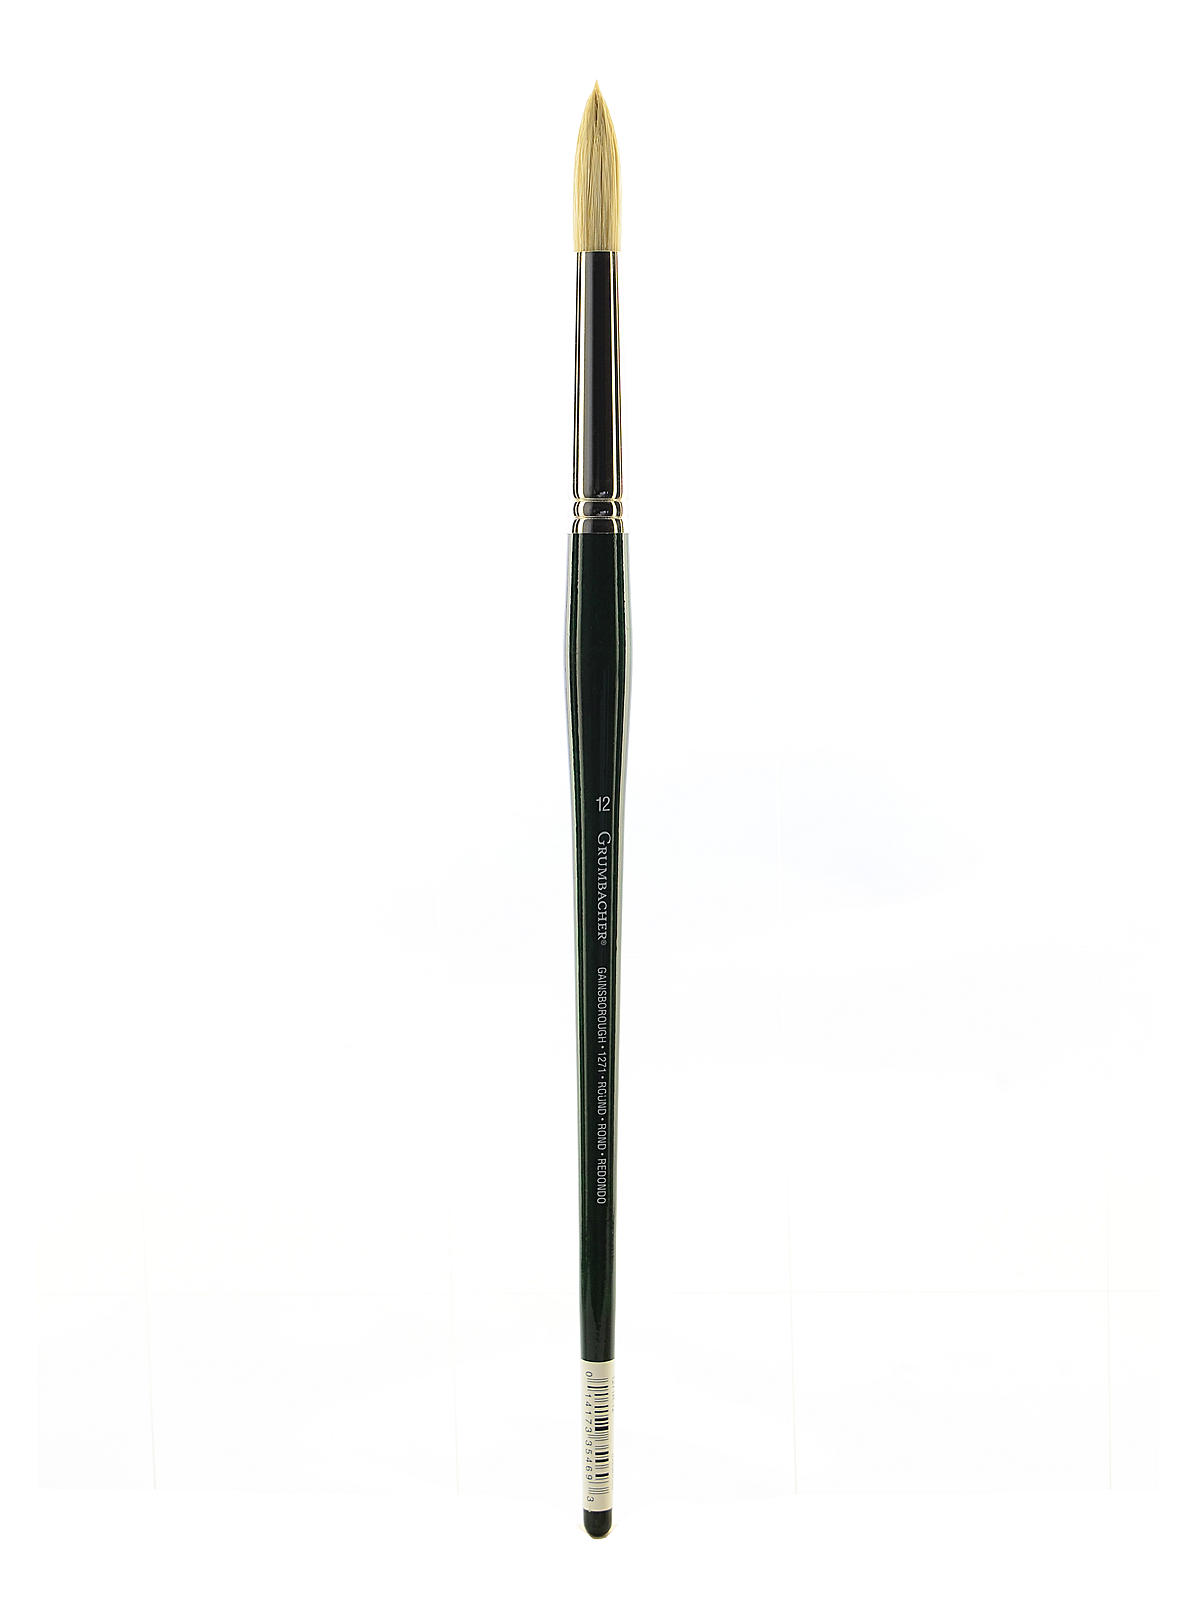 Gainsborough Oil And Acrylic Brushes 12 Round